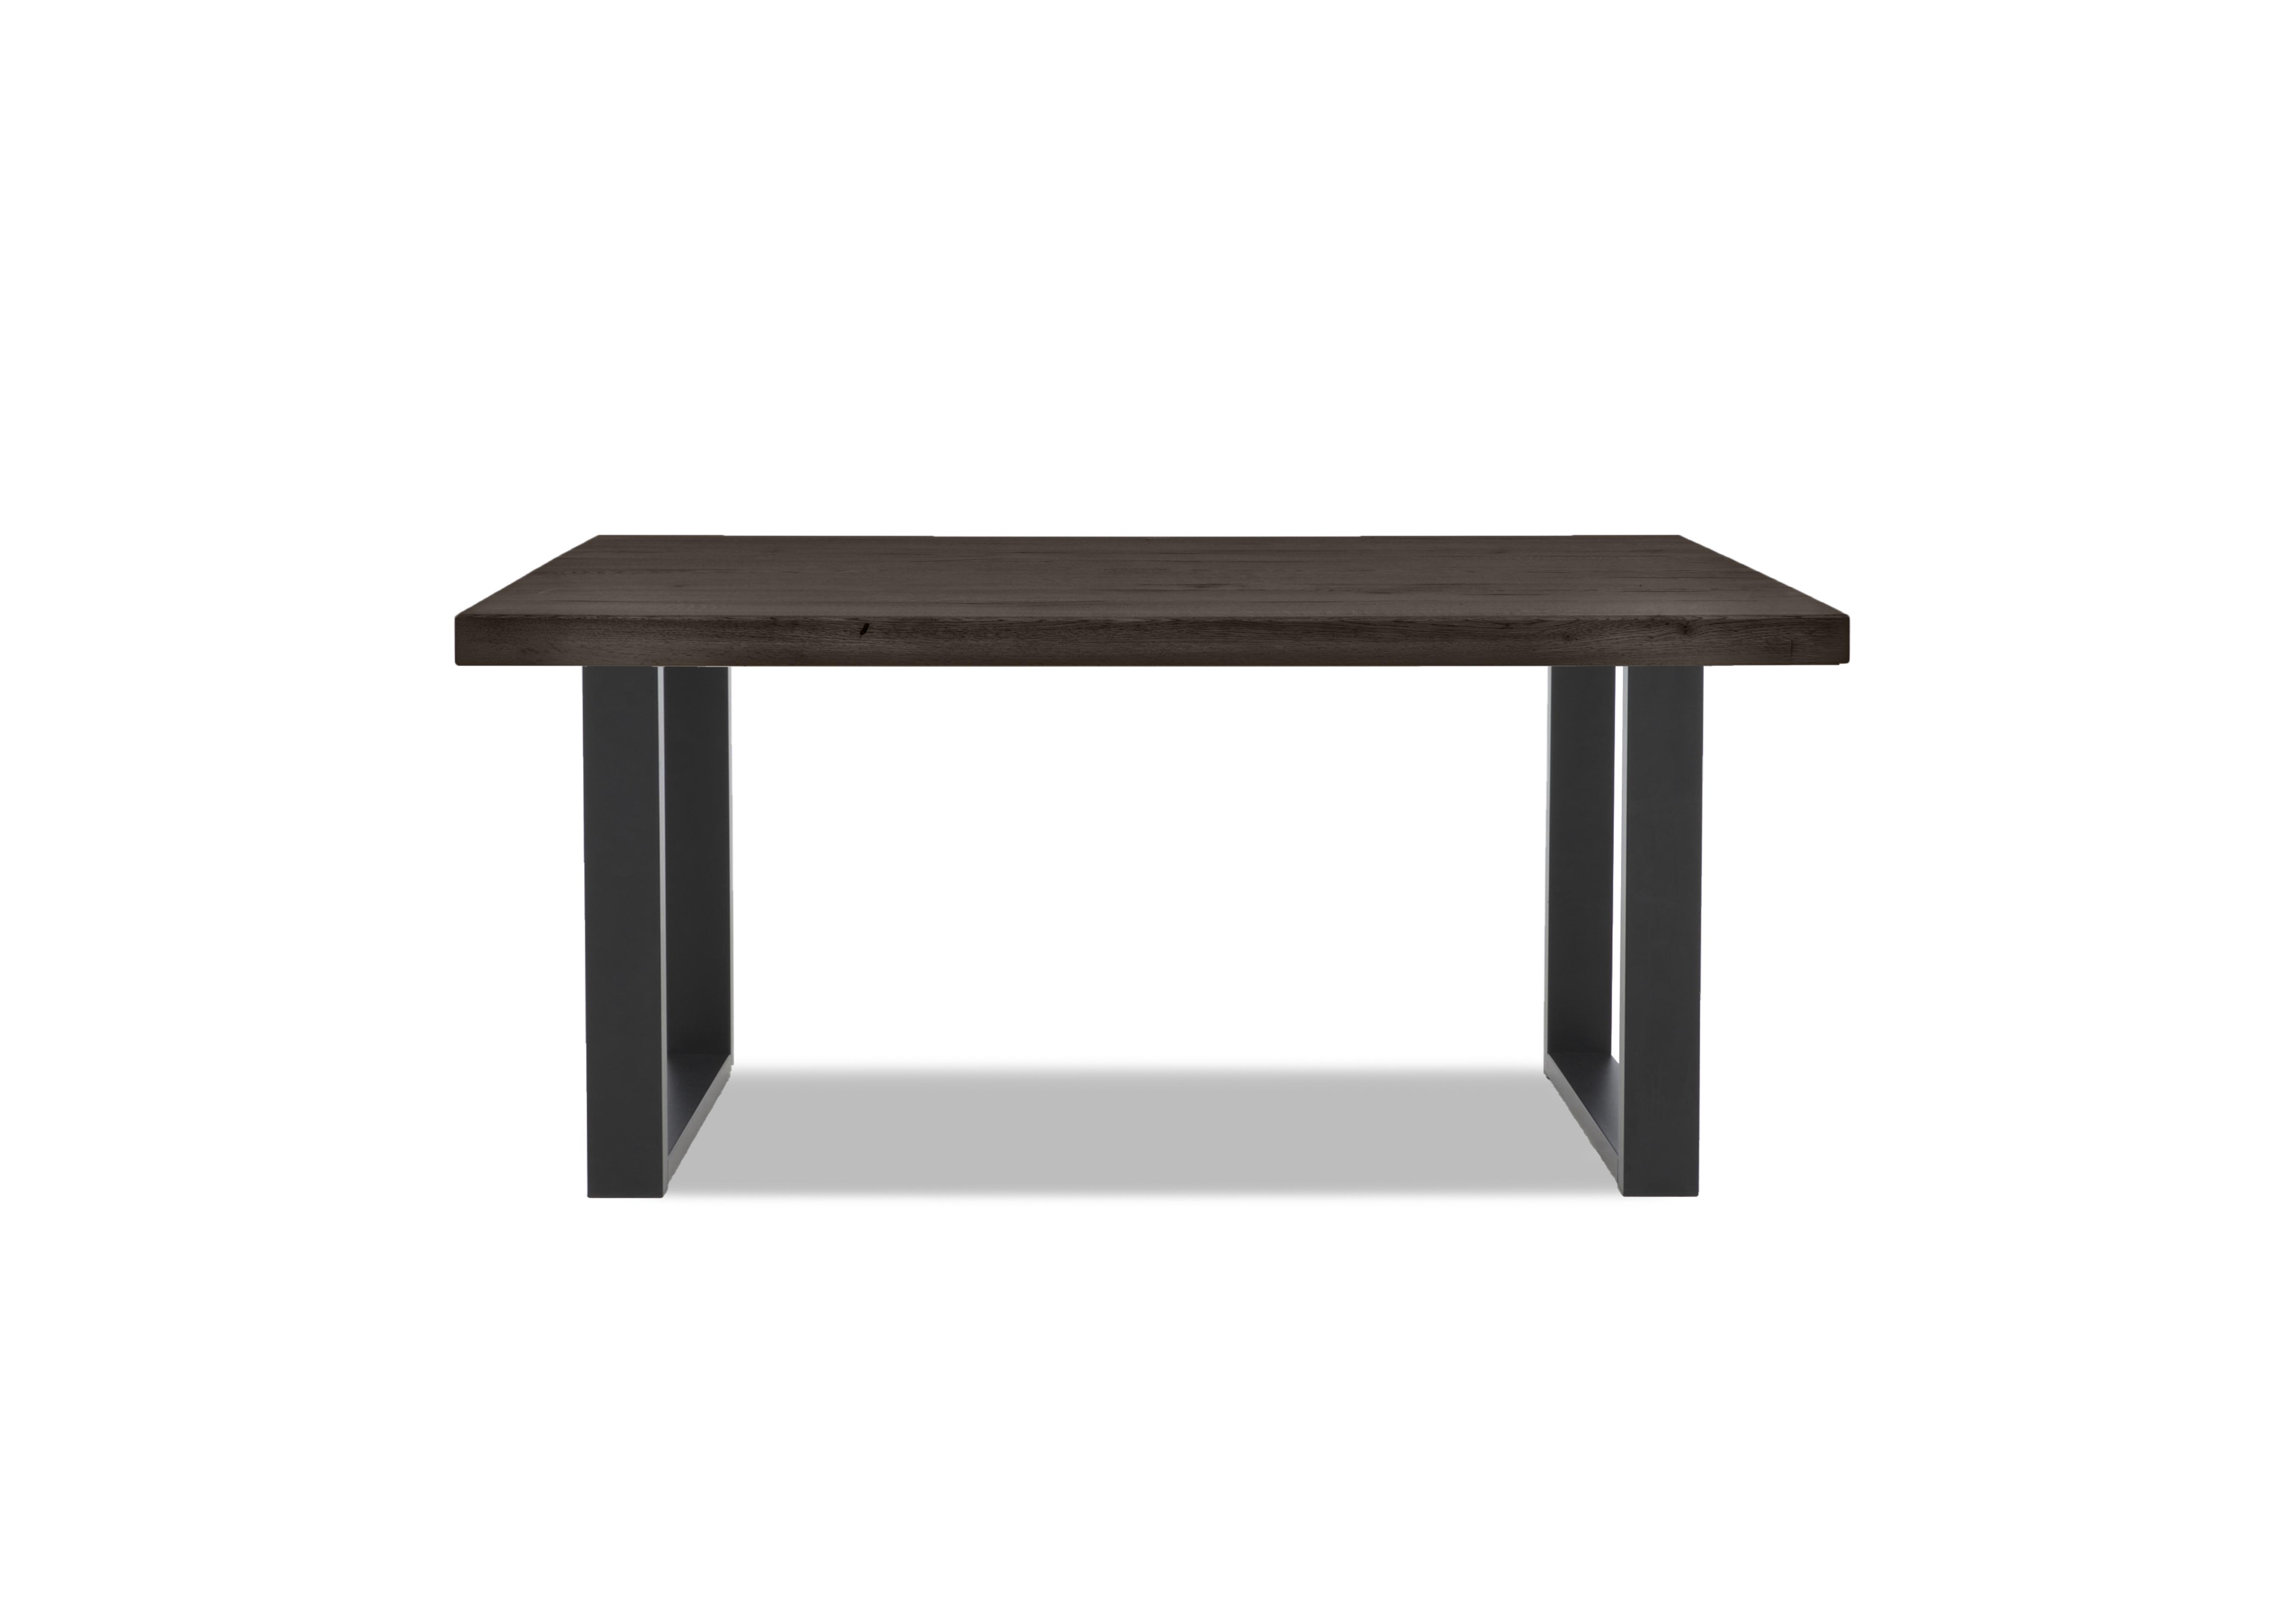 Compact Terra Straight Edge Dining Table with U-Shaped Legs in 02 Smoked on Furniture Village